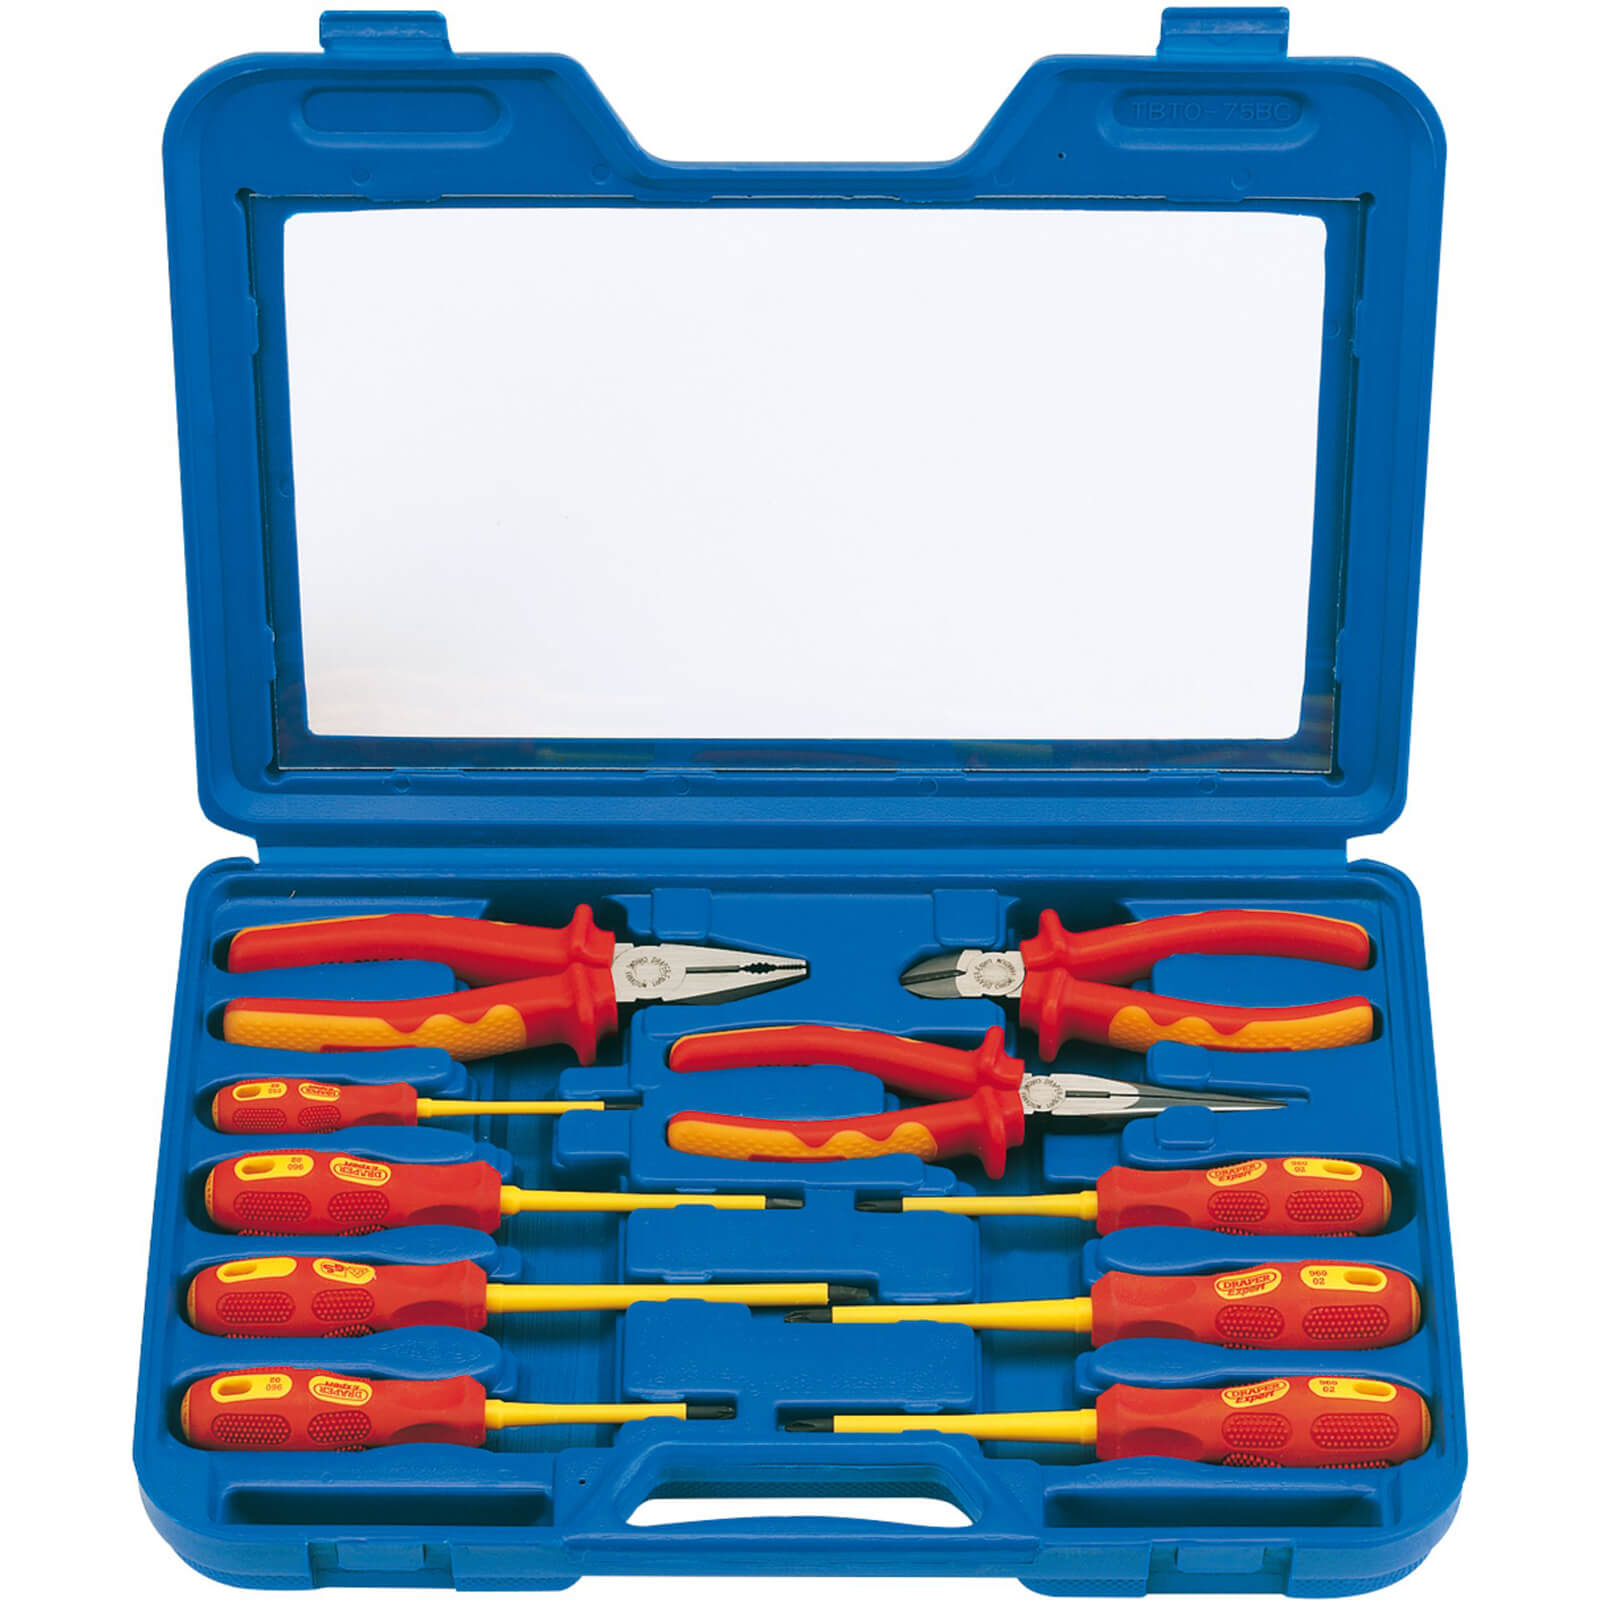 Image of Draper Expert 10 Piece Insulated Plier and Screwdriver Set